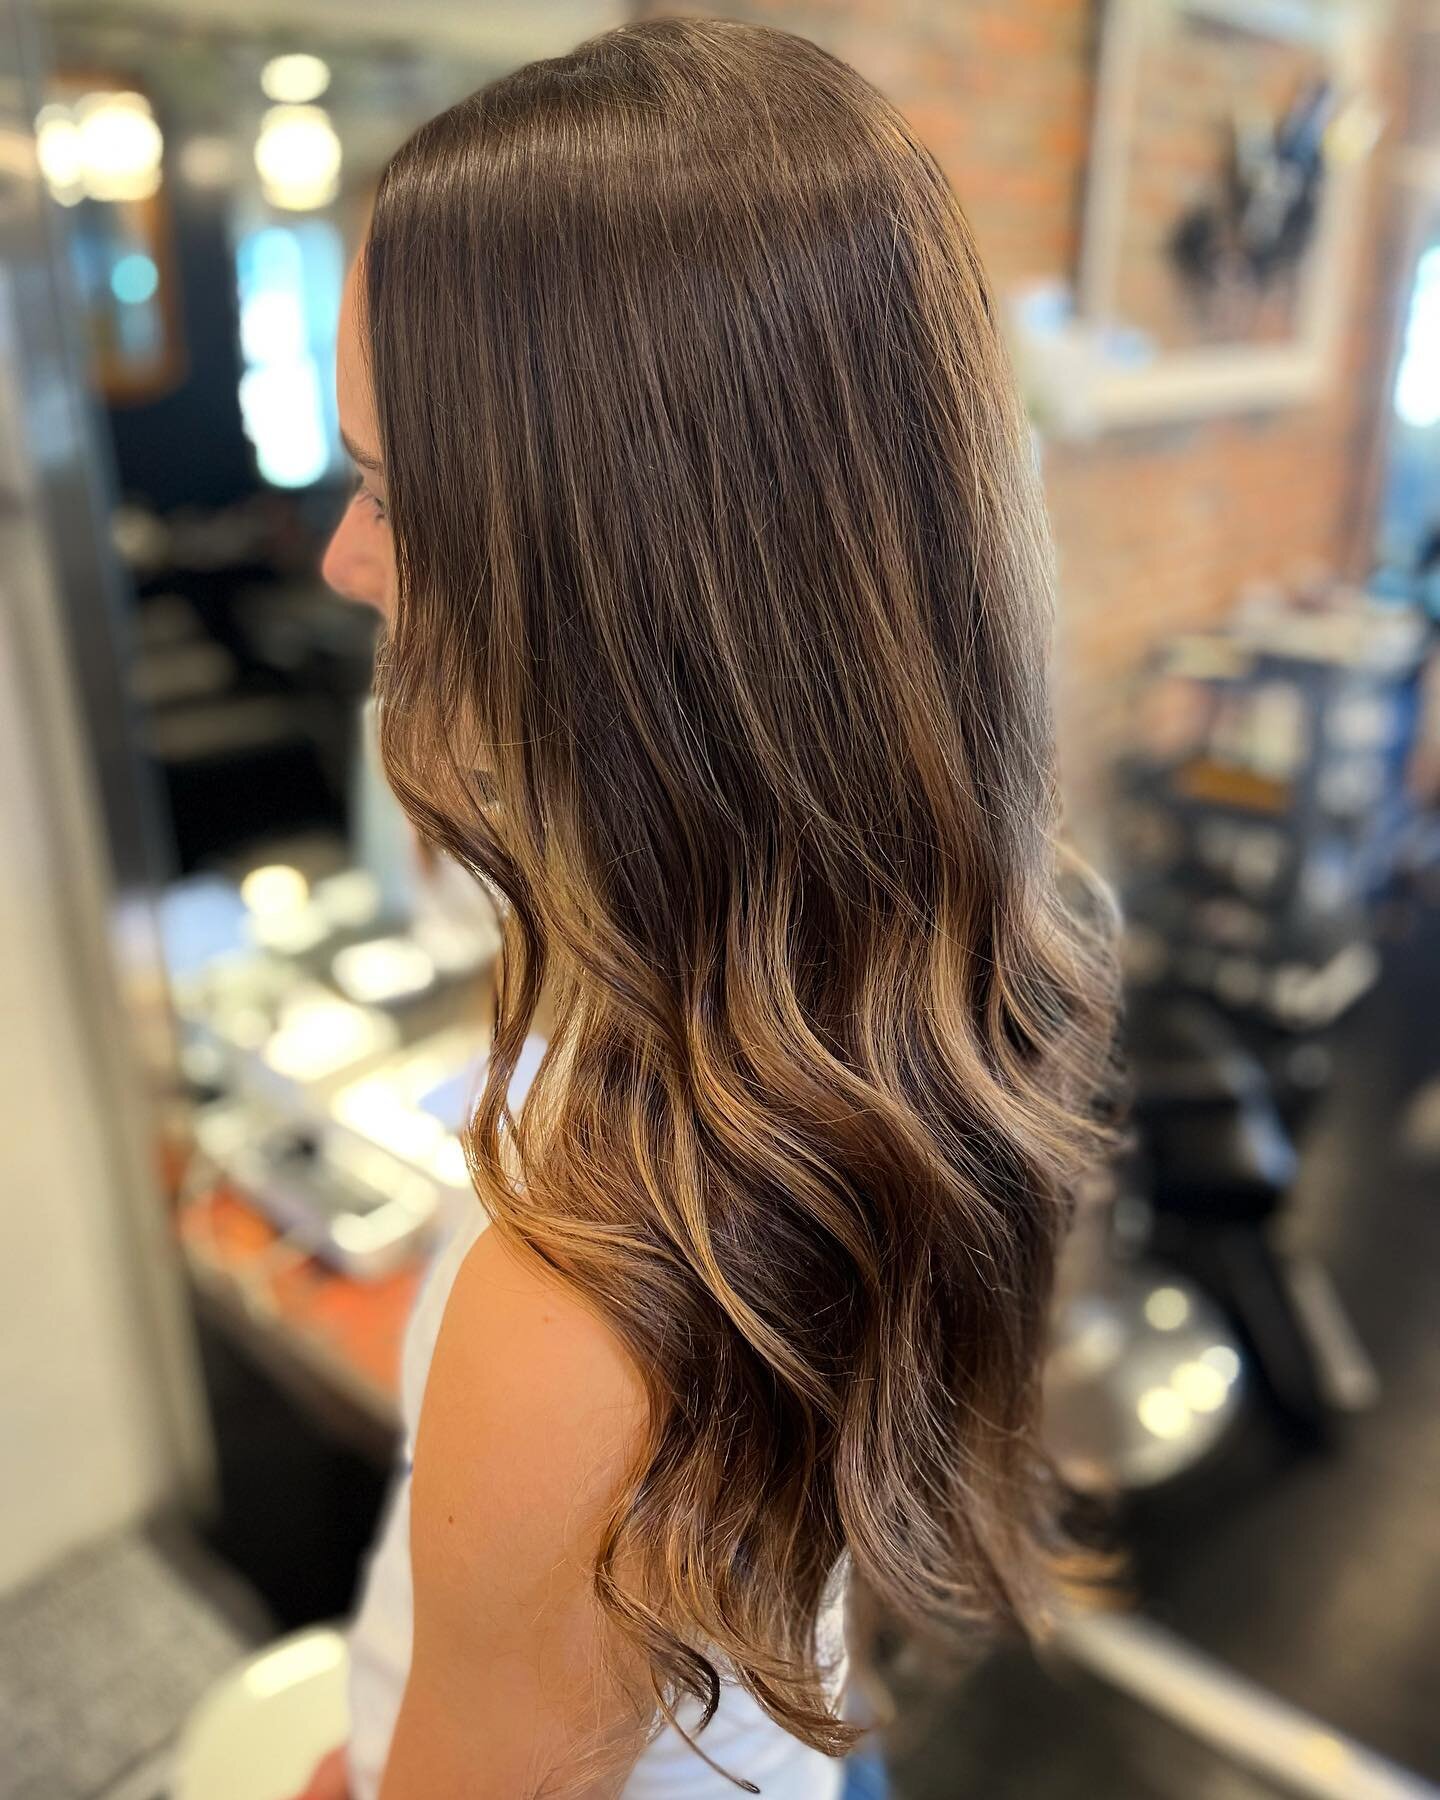 Subtle highlights just in time for summer. Hair by Kate